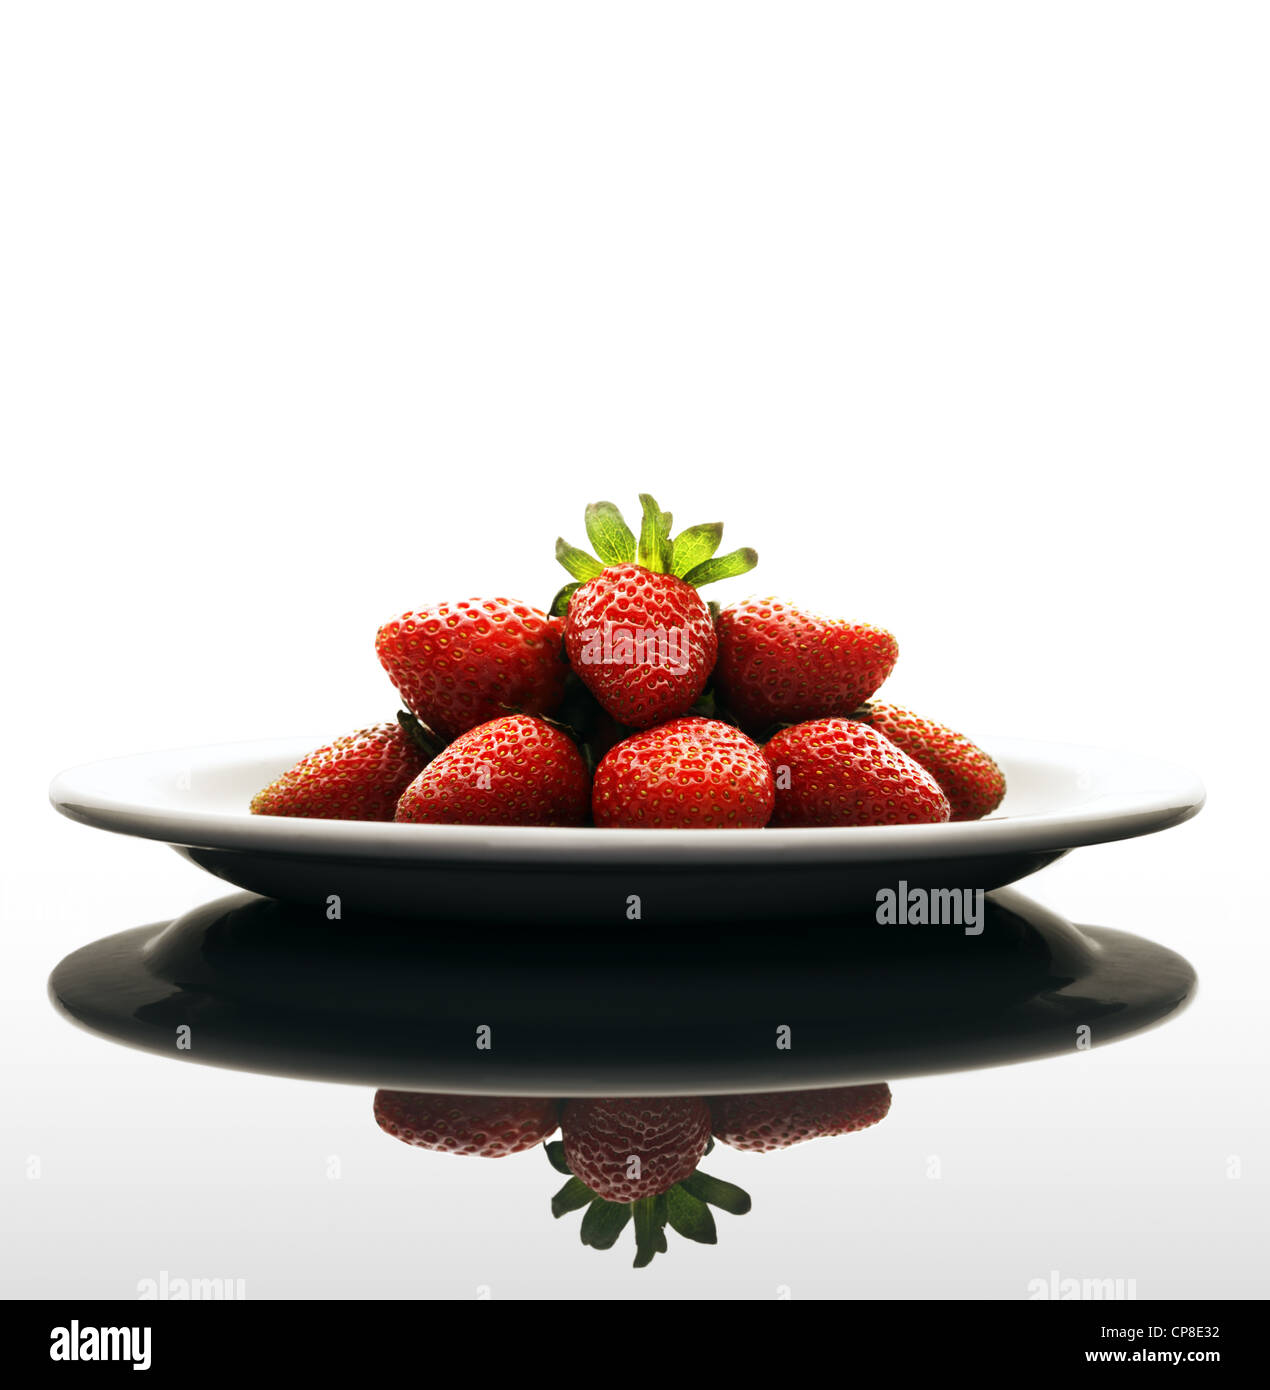 Red Strawberries on a Plate with Reflection Stock Photo